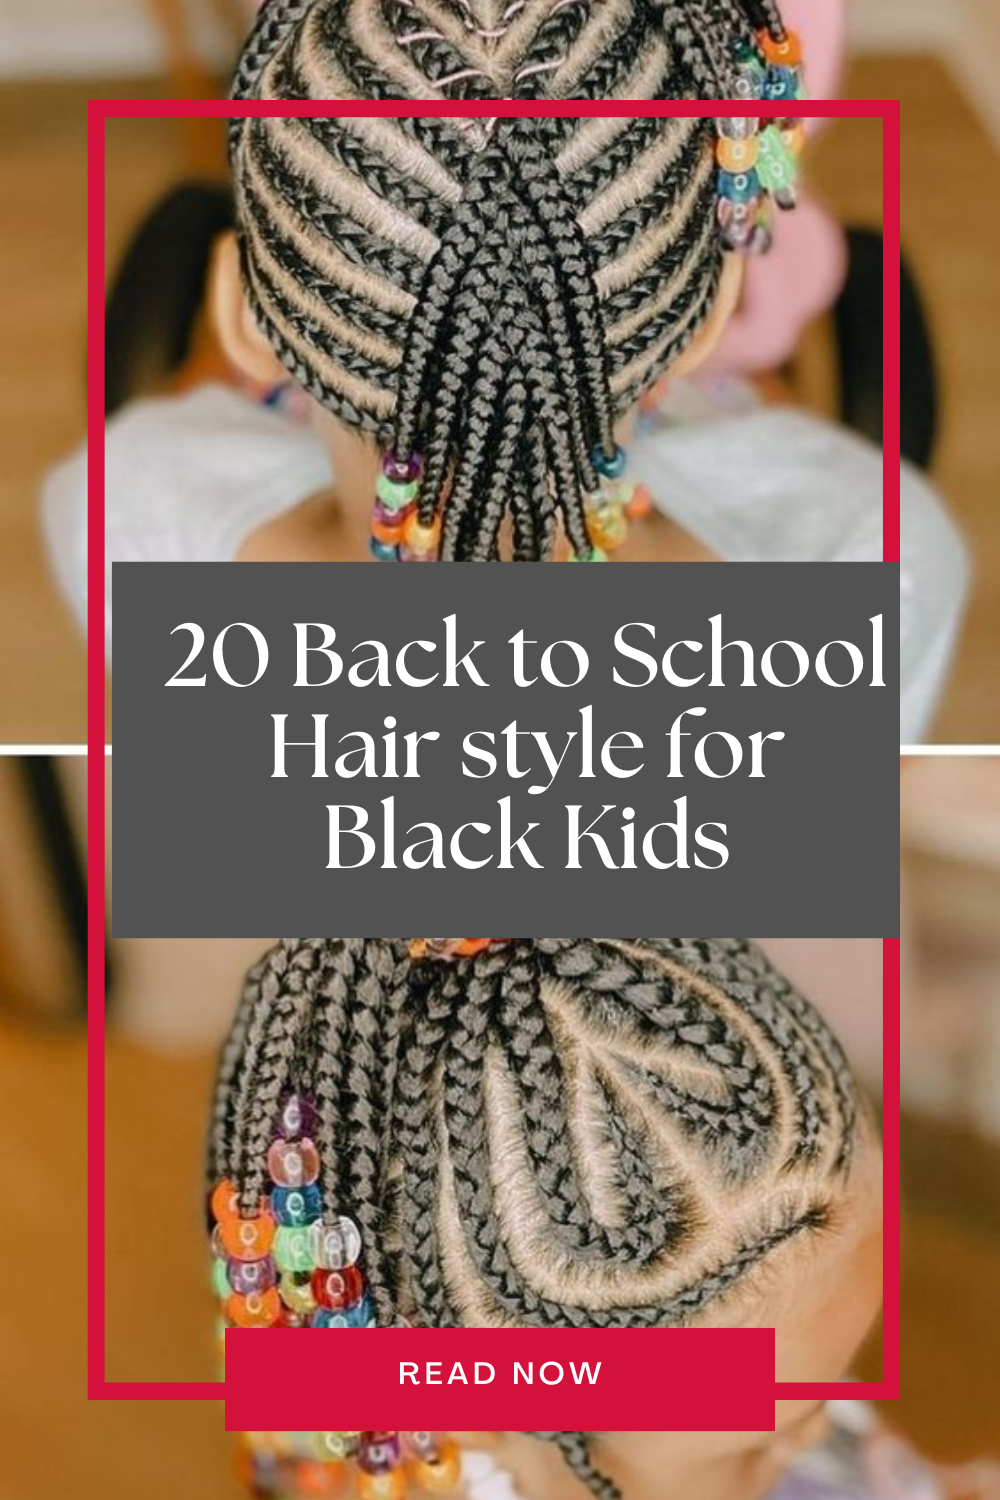 100 Natural Hairstyles for Kids – Hello Hair Children's Book